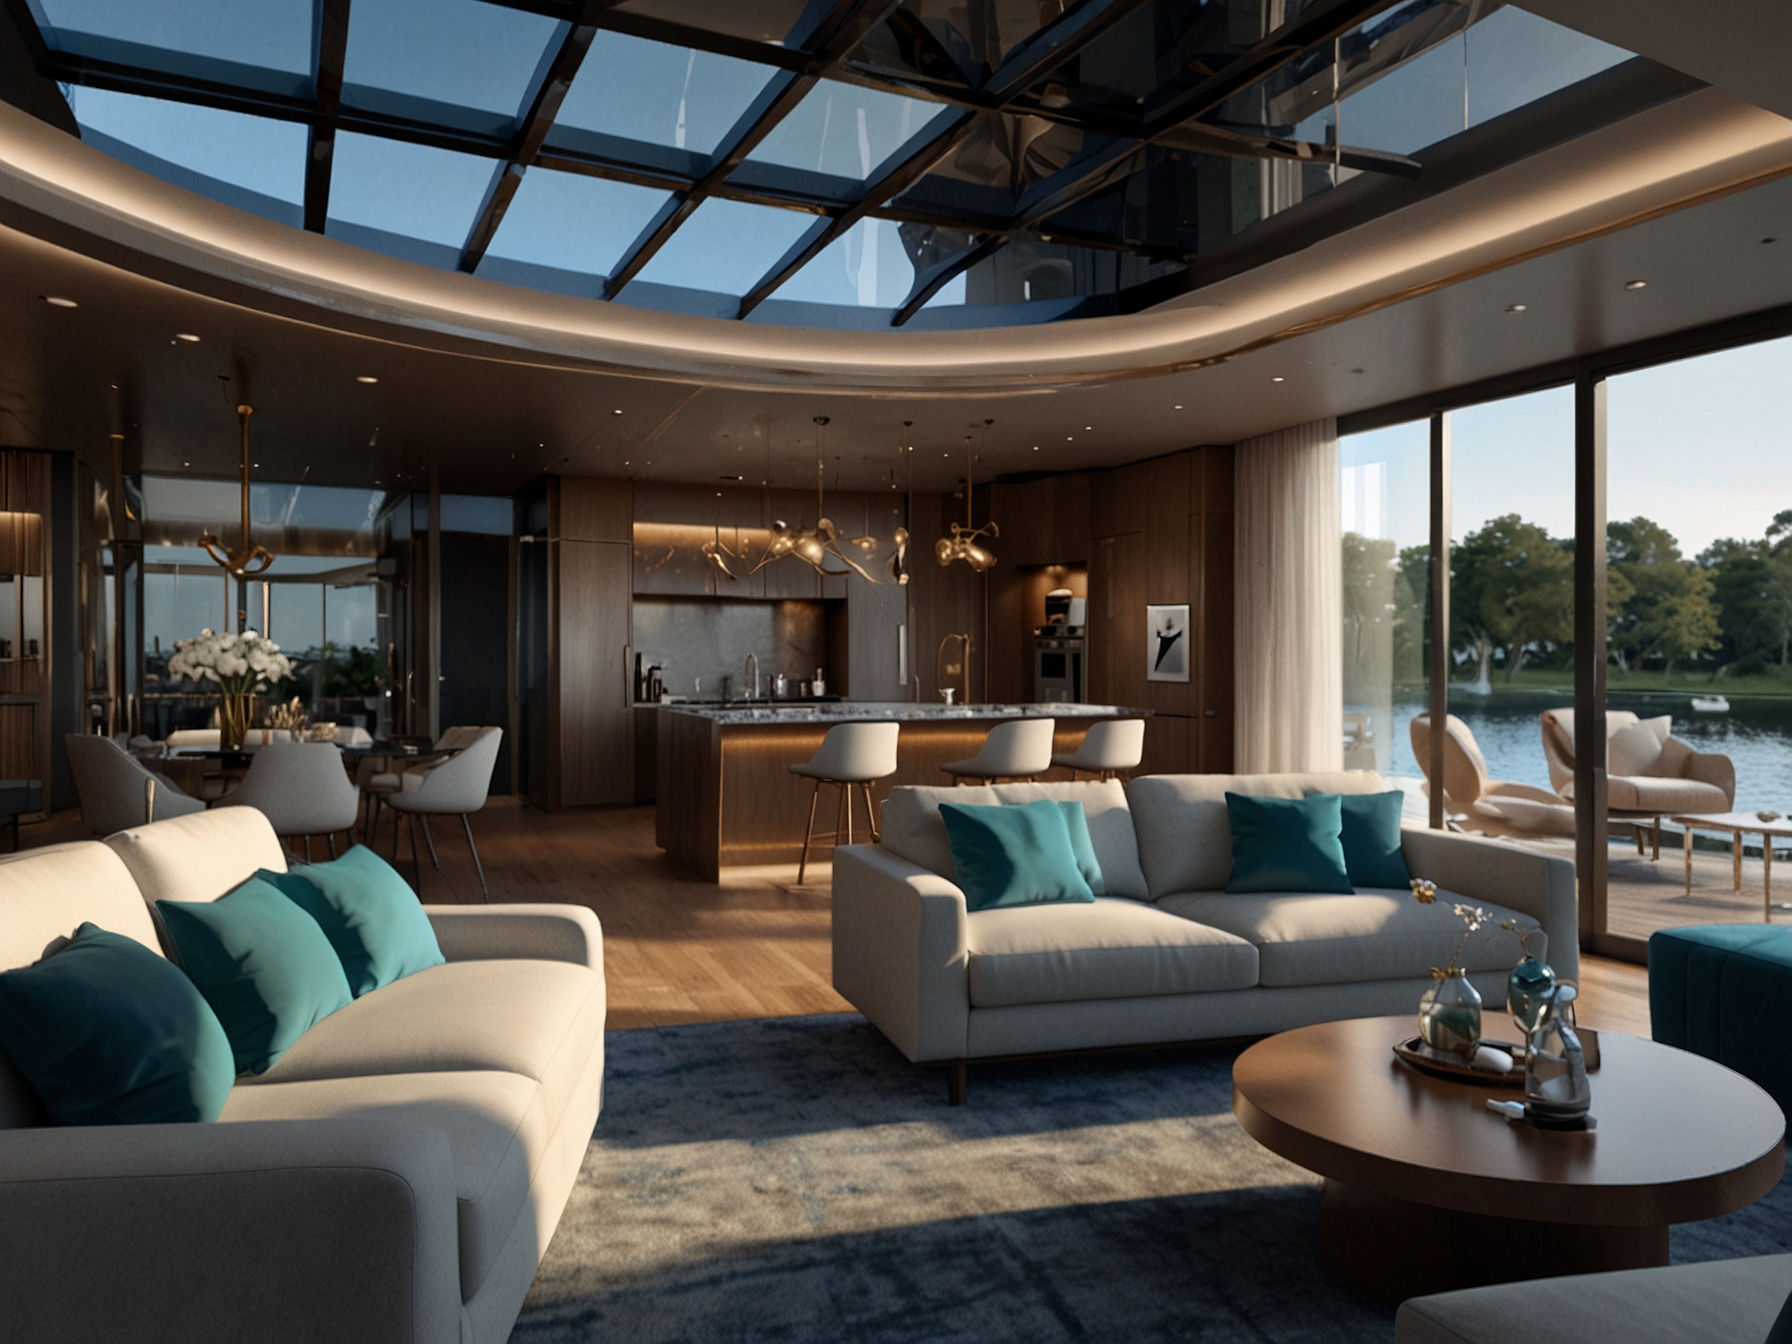 The interior of the Bluephire 34 featuring the striking glass salon with plush furnishings and high-end finishes, emphasizing the seamless indoor-outdoor experience and luxurious living space.